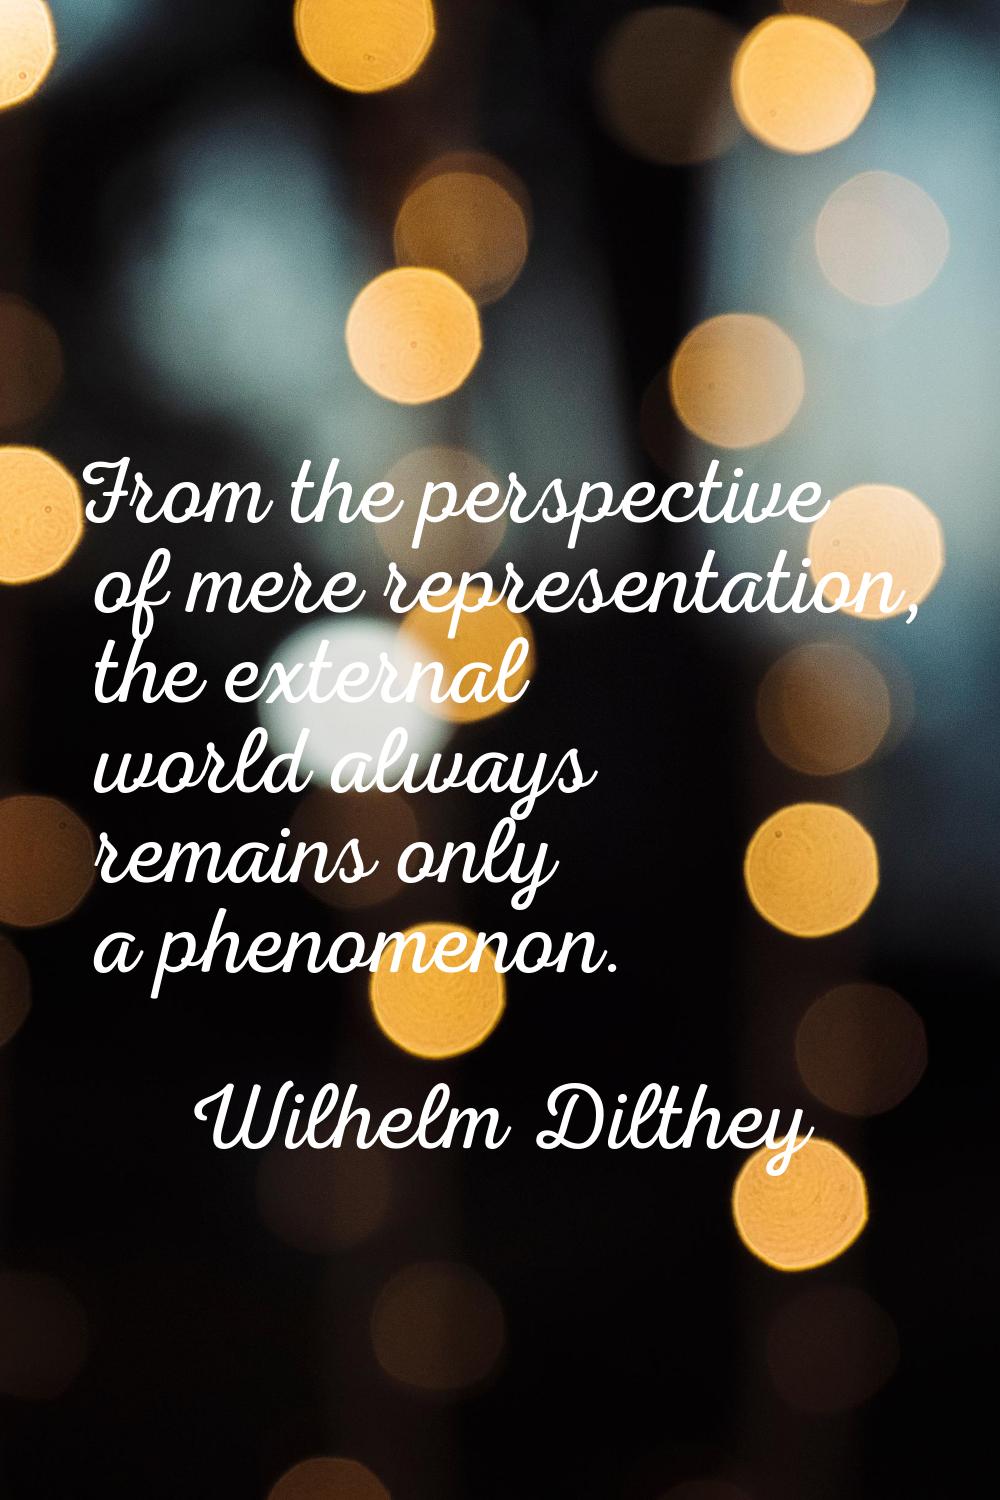 From the perspective of mere representation, the external world always remains only a phenomenon.